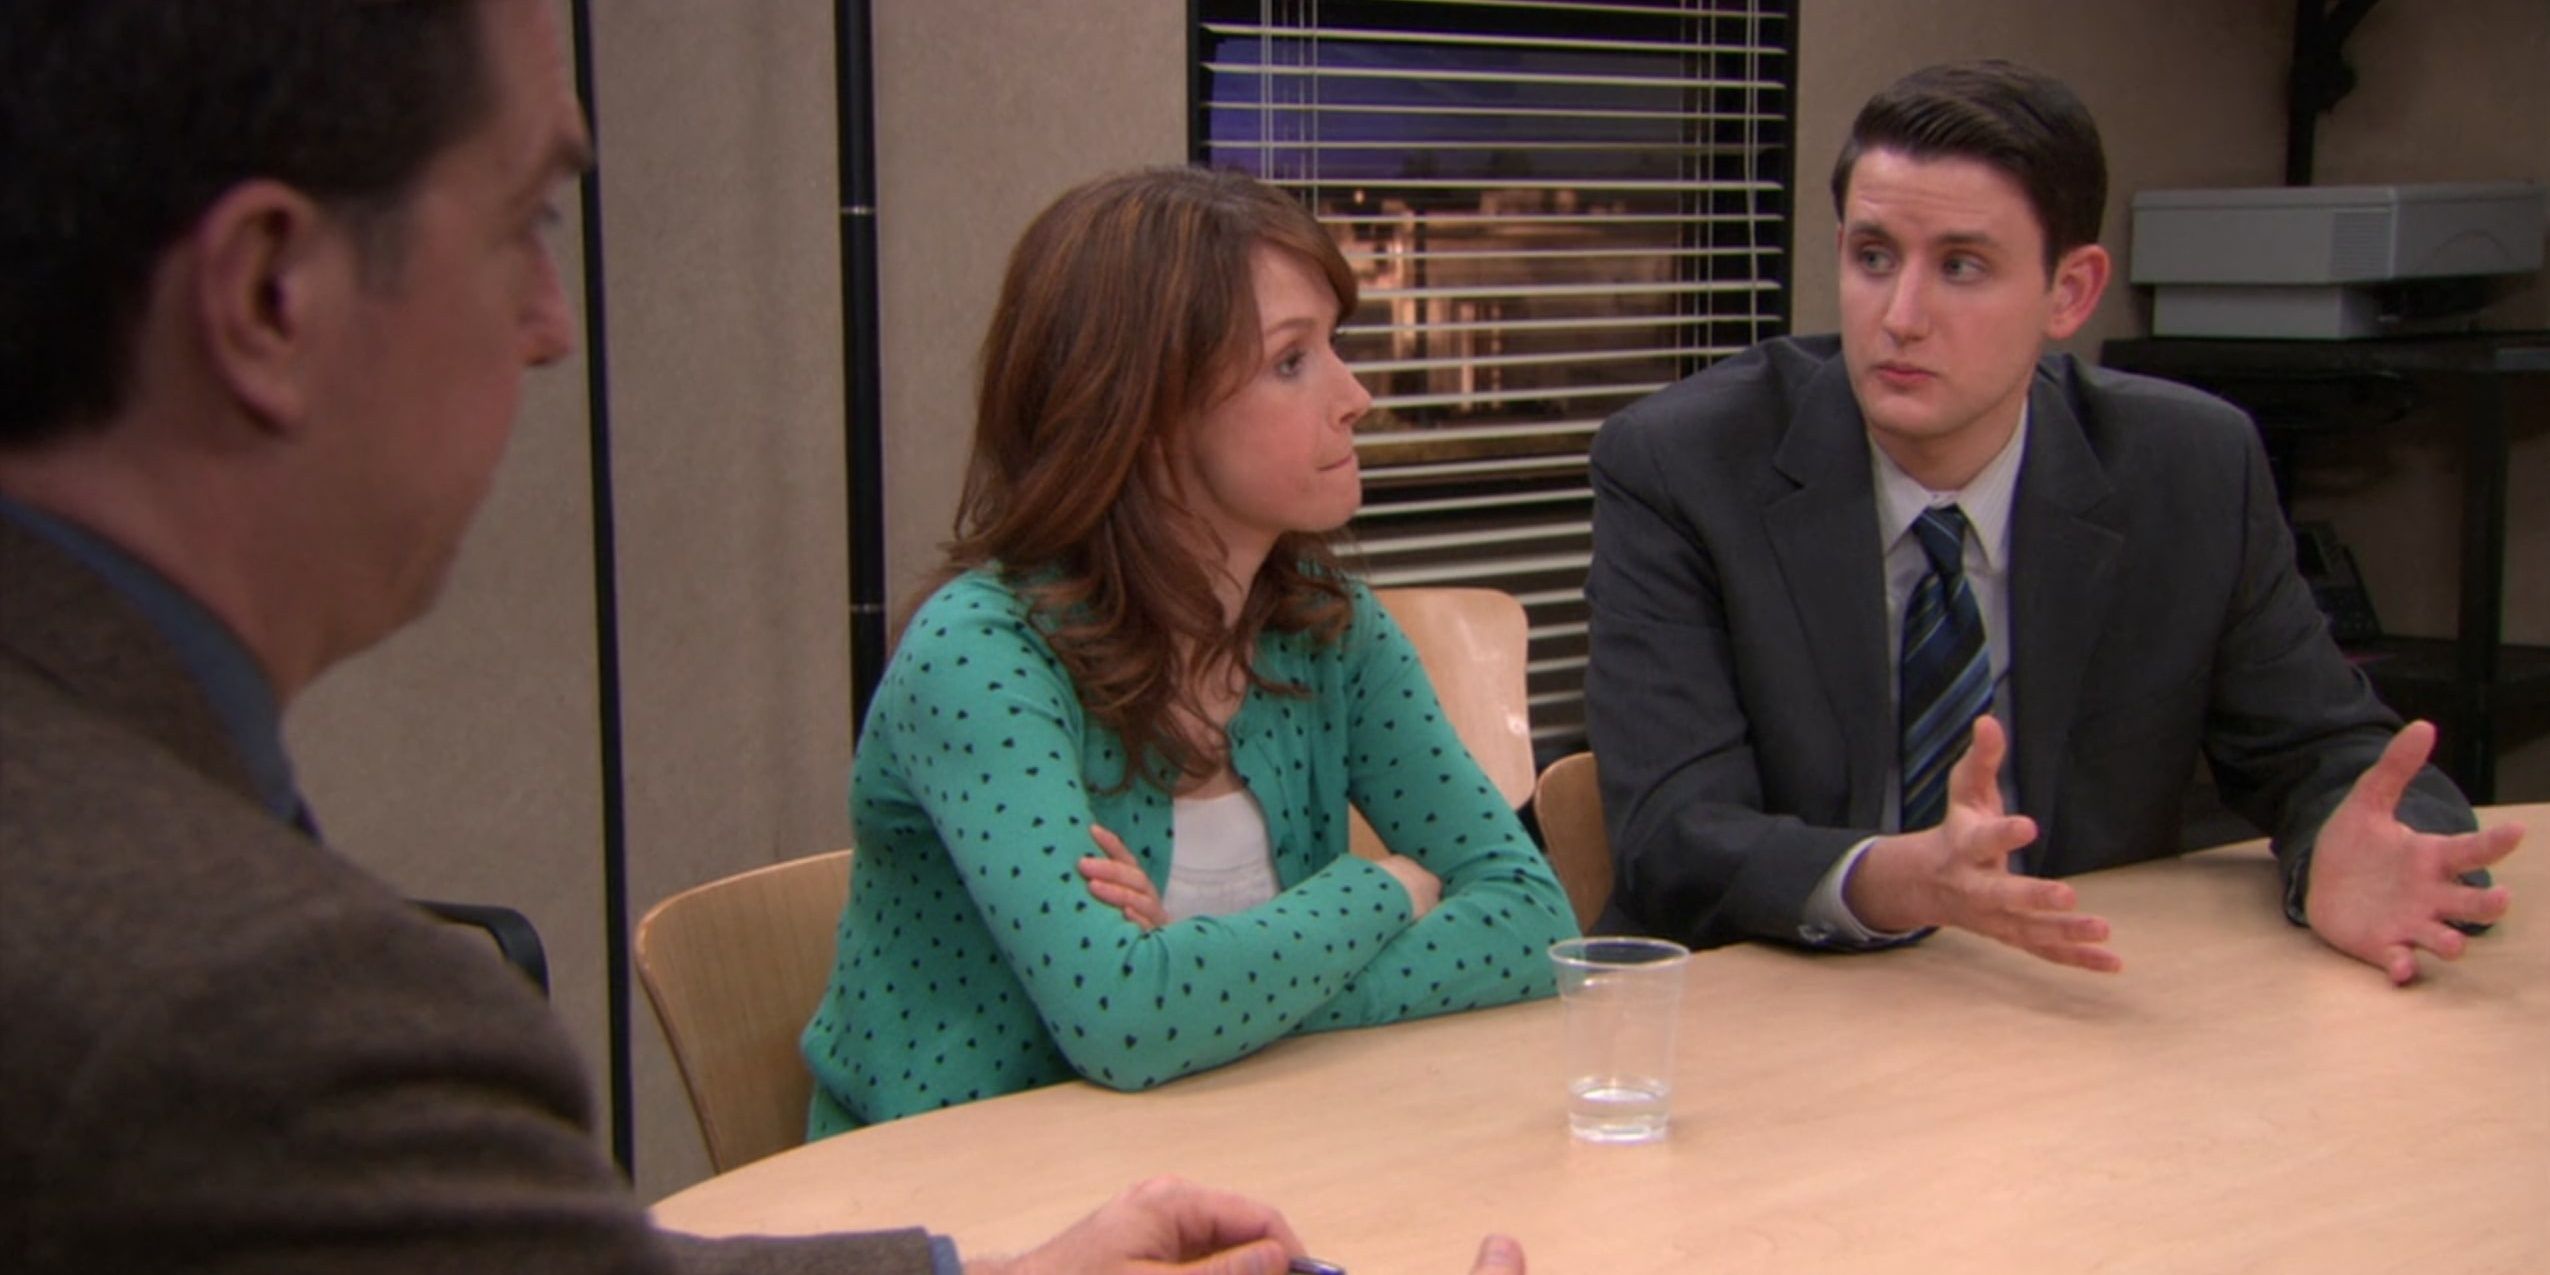 Andy, Erin and Gabe sitting at conference room table. Erin looks annoyed as Gabe explains something.